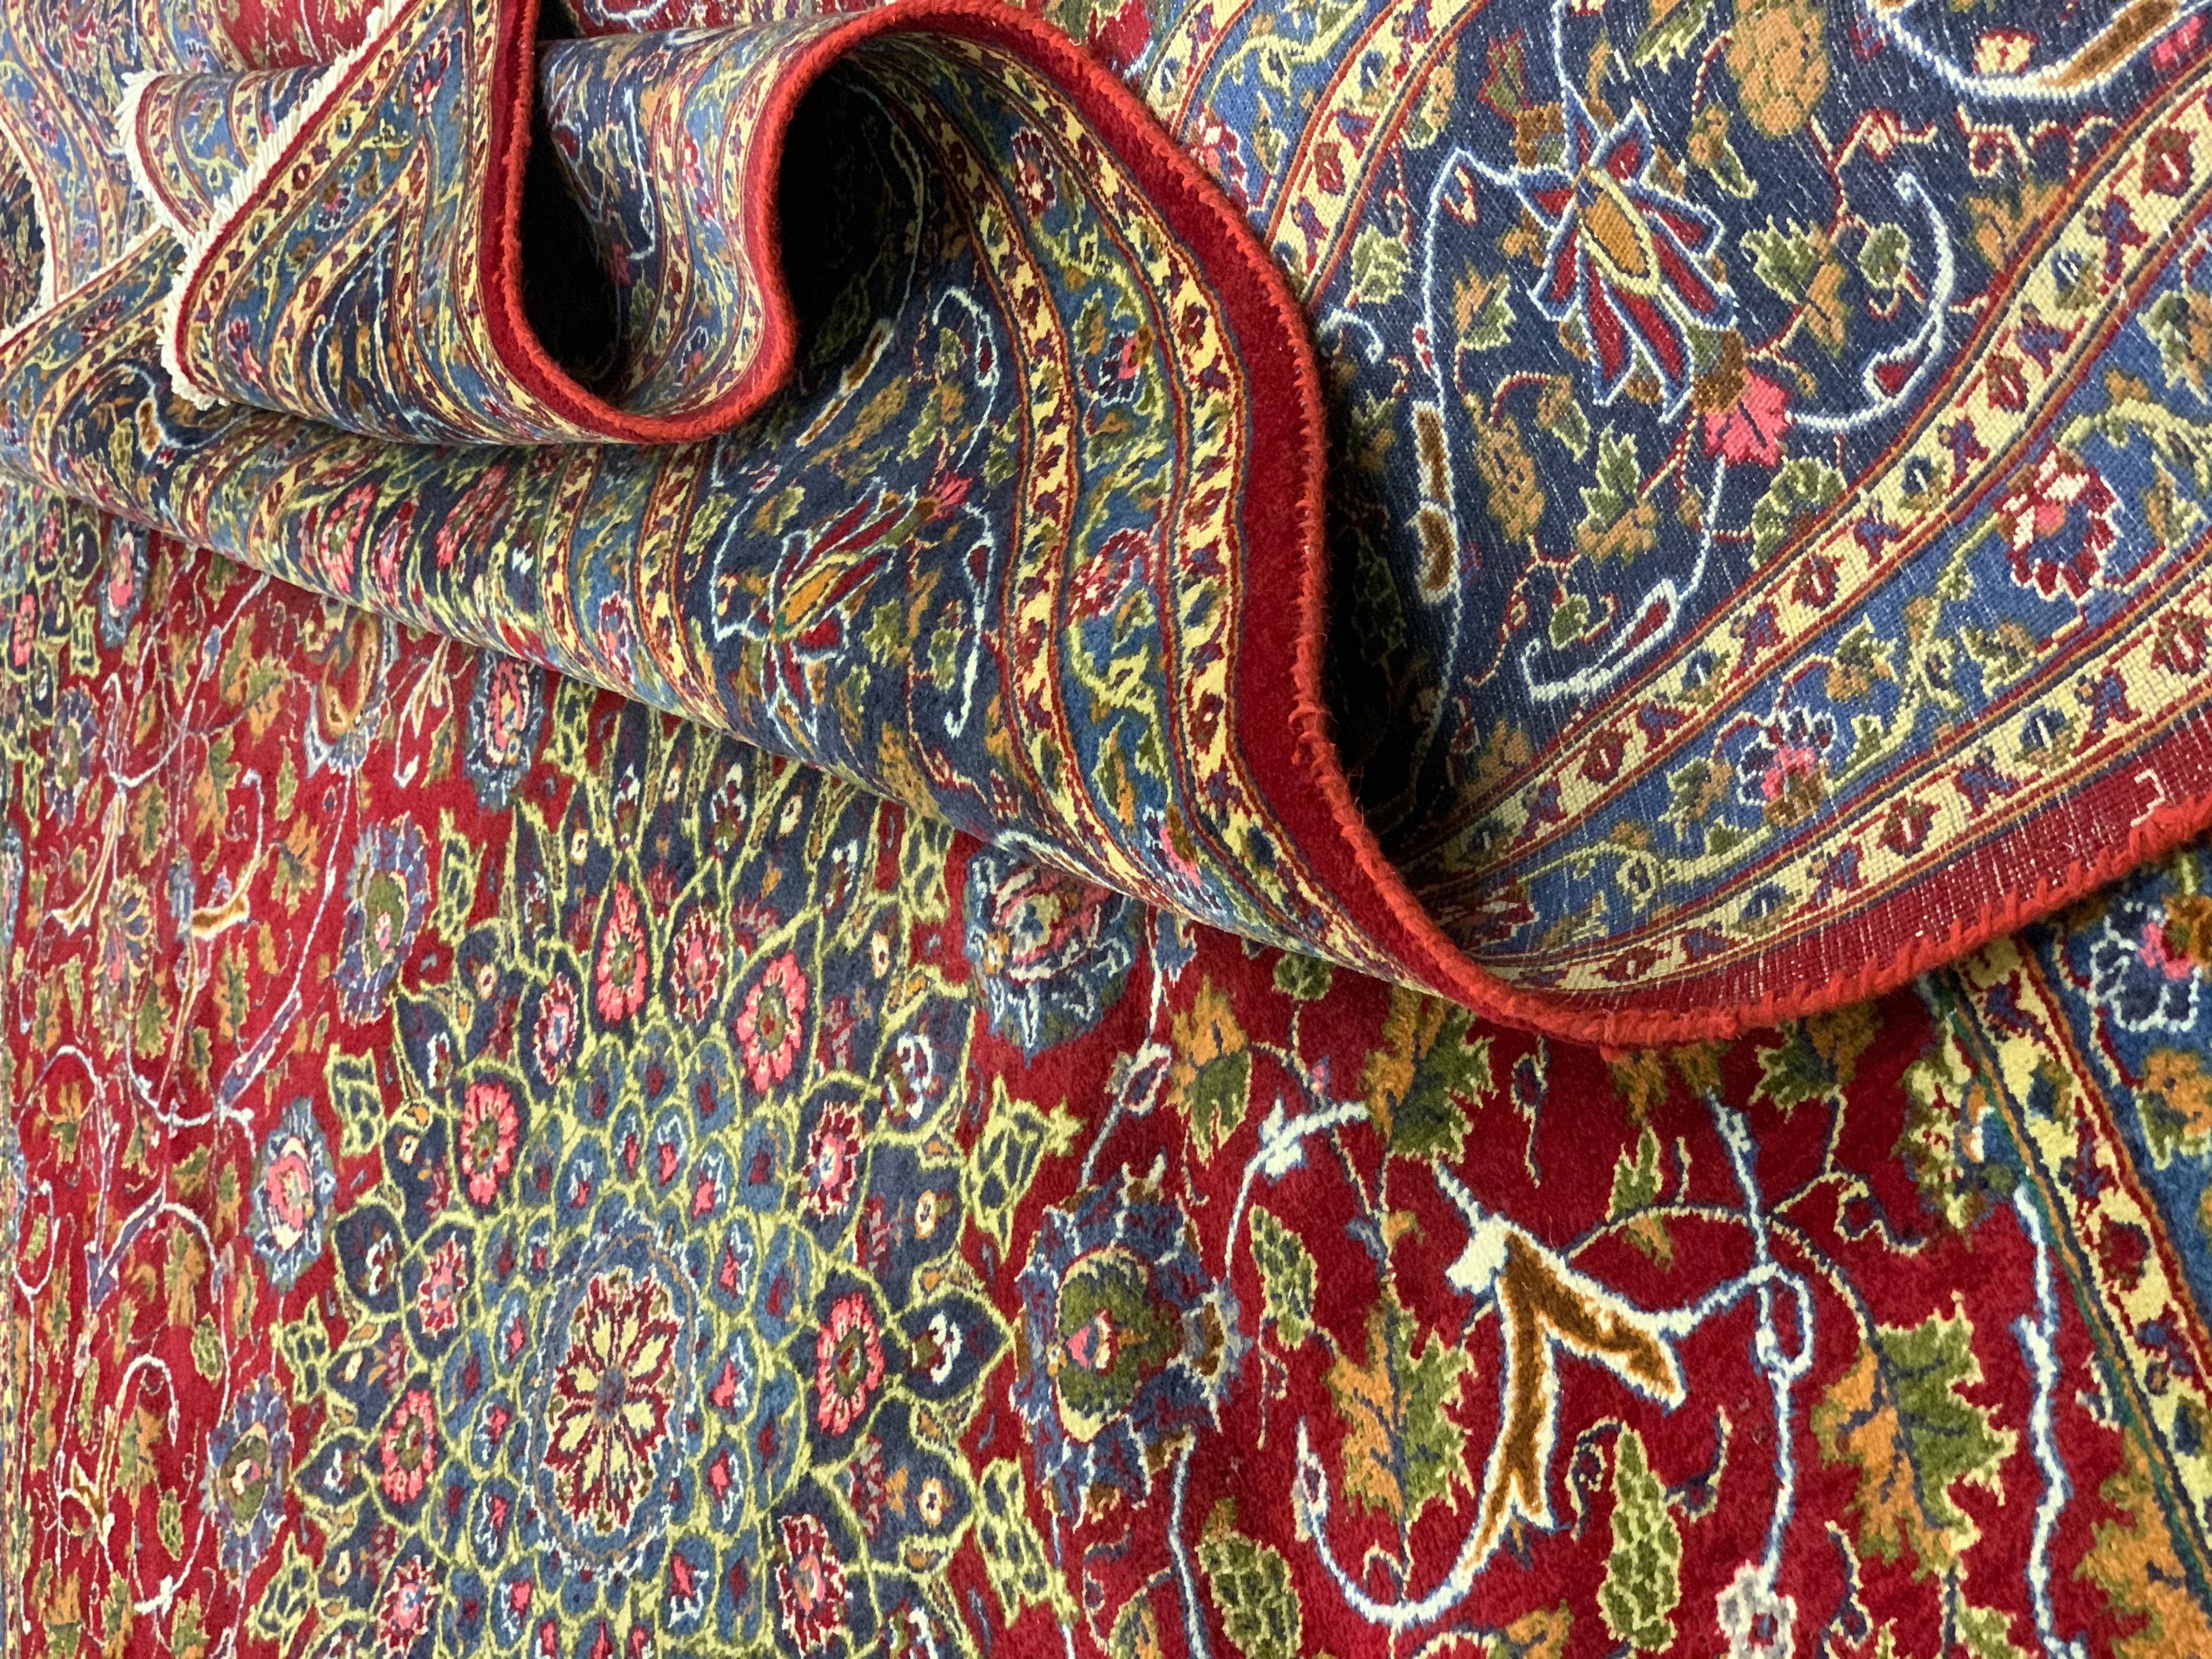 This bold wool carpet has been woven with a rich red background that has been decorated with a traditional medallion design. Symmetrically woven with botanical patterns including flowers and leaves that elegantly cascade around the intricate